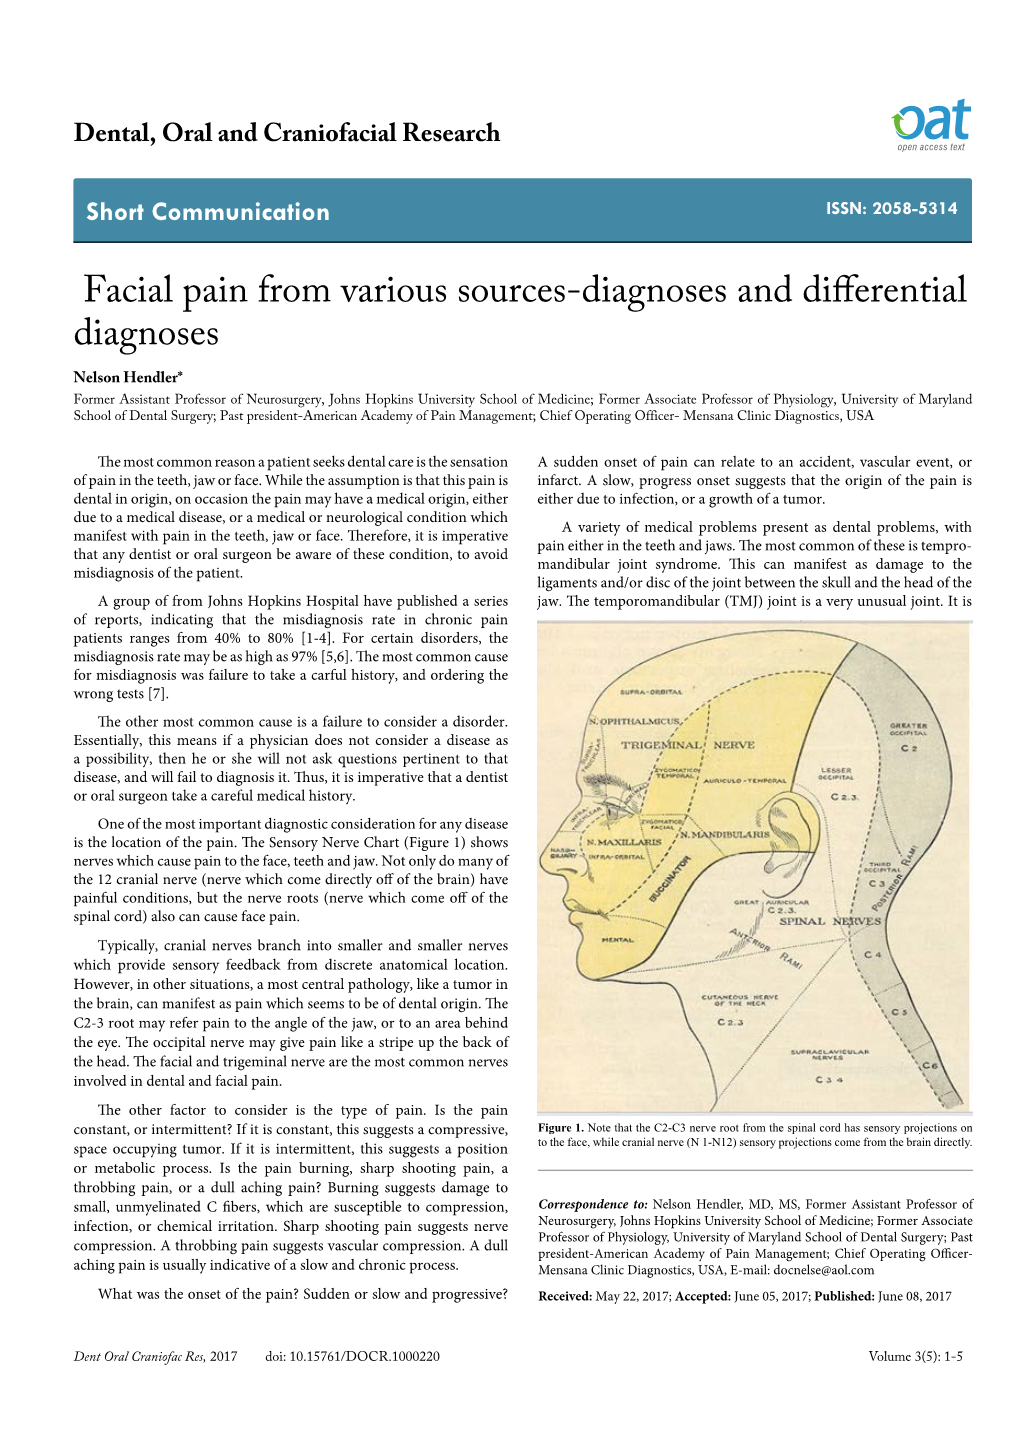 Facial Pain from Various Sources-Diagnoses and Differential